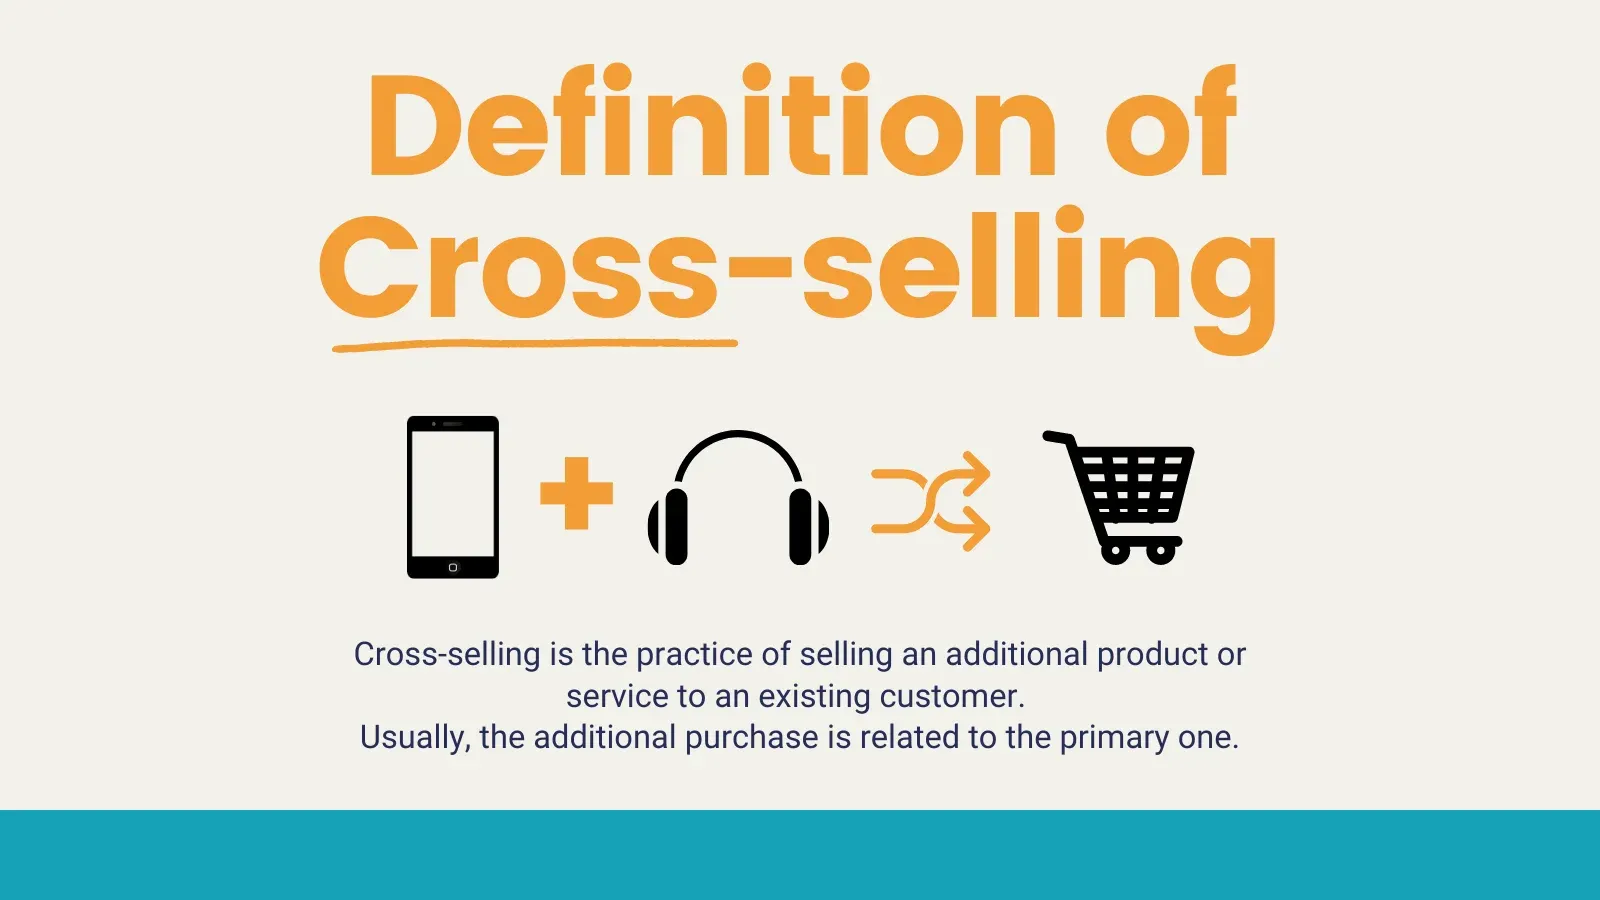 What is cross selling?